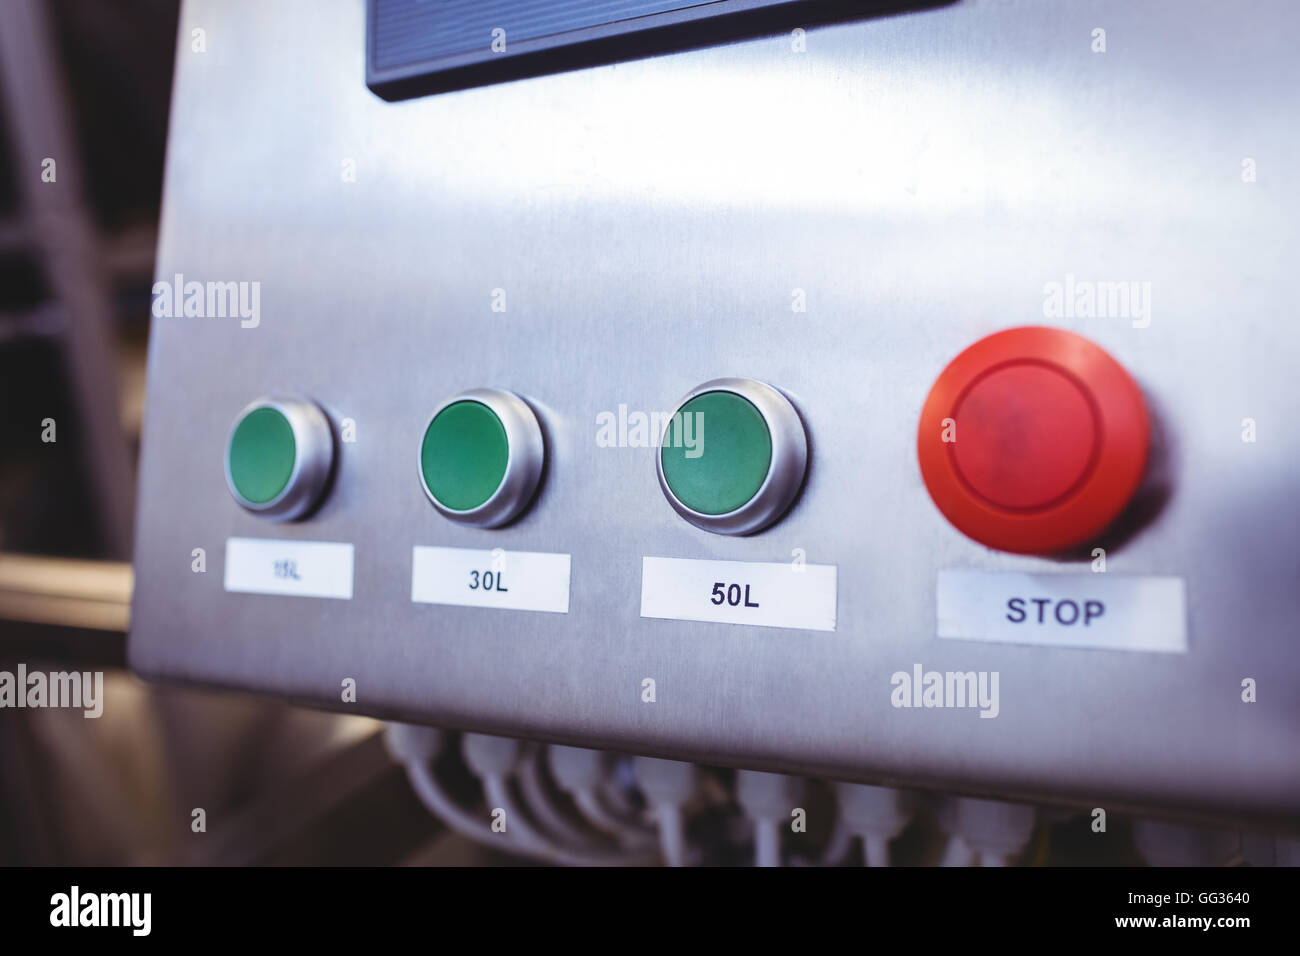 Stop button on machinery at brewery Stock Photo